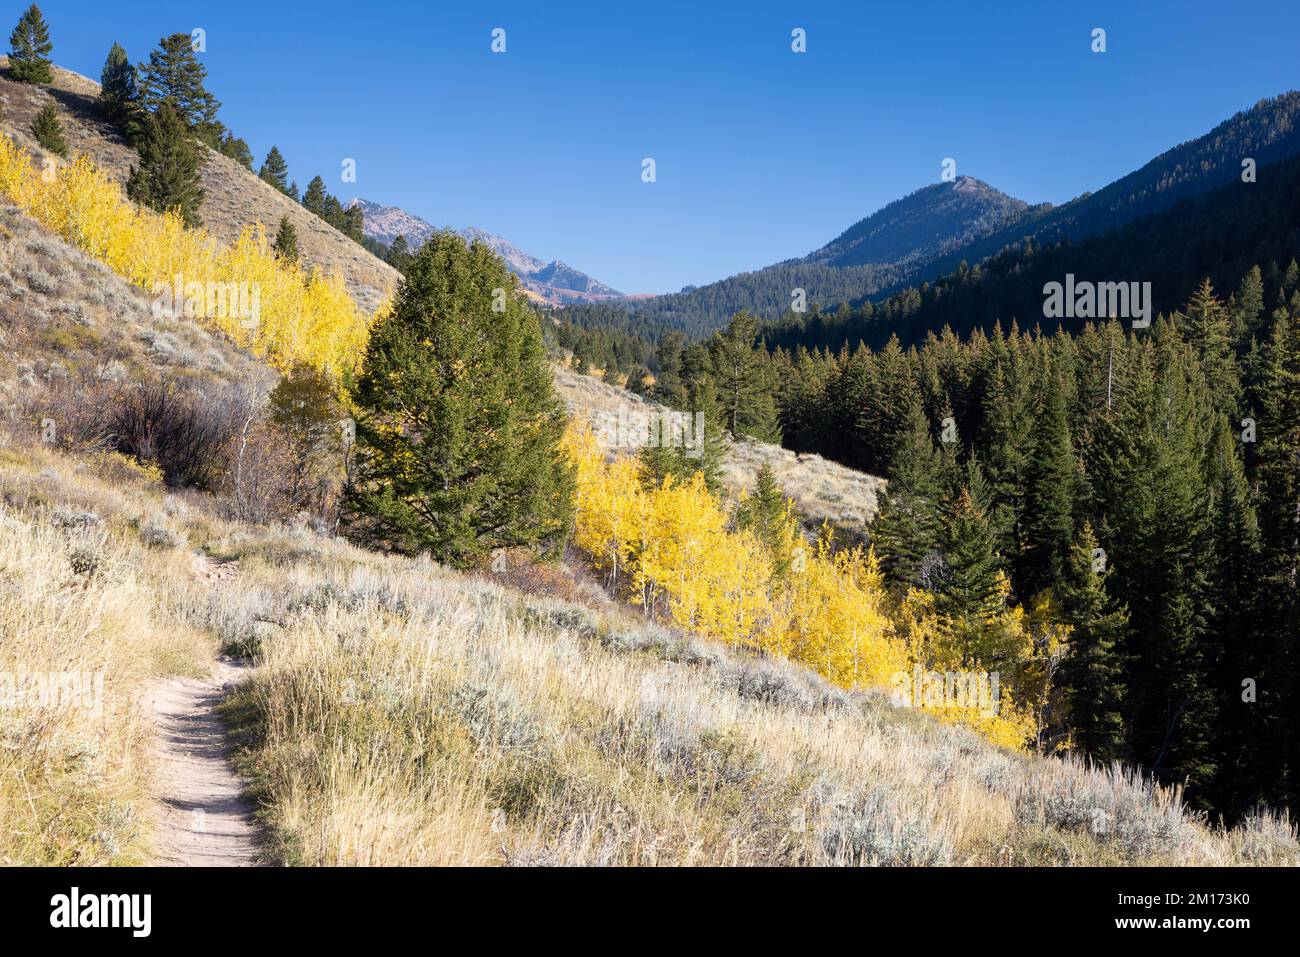 The Sidewalk Trail in the Gros Ventre Mountains meandering toward fall aspen trees. Bridger-Teton National Forest, Wyoming Stock Photo